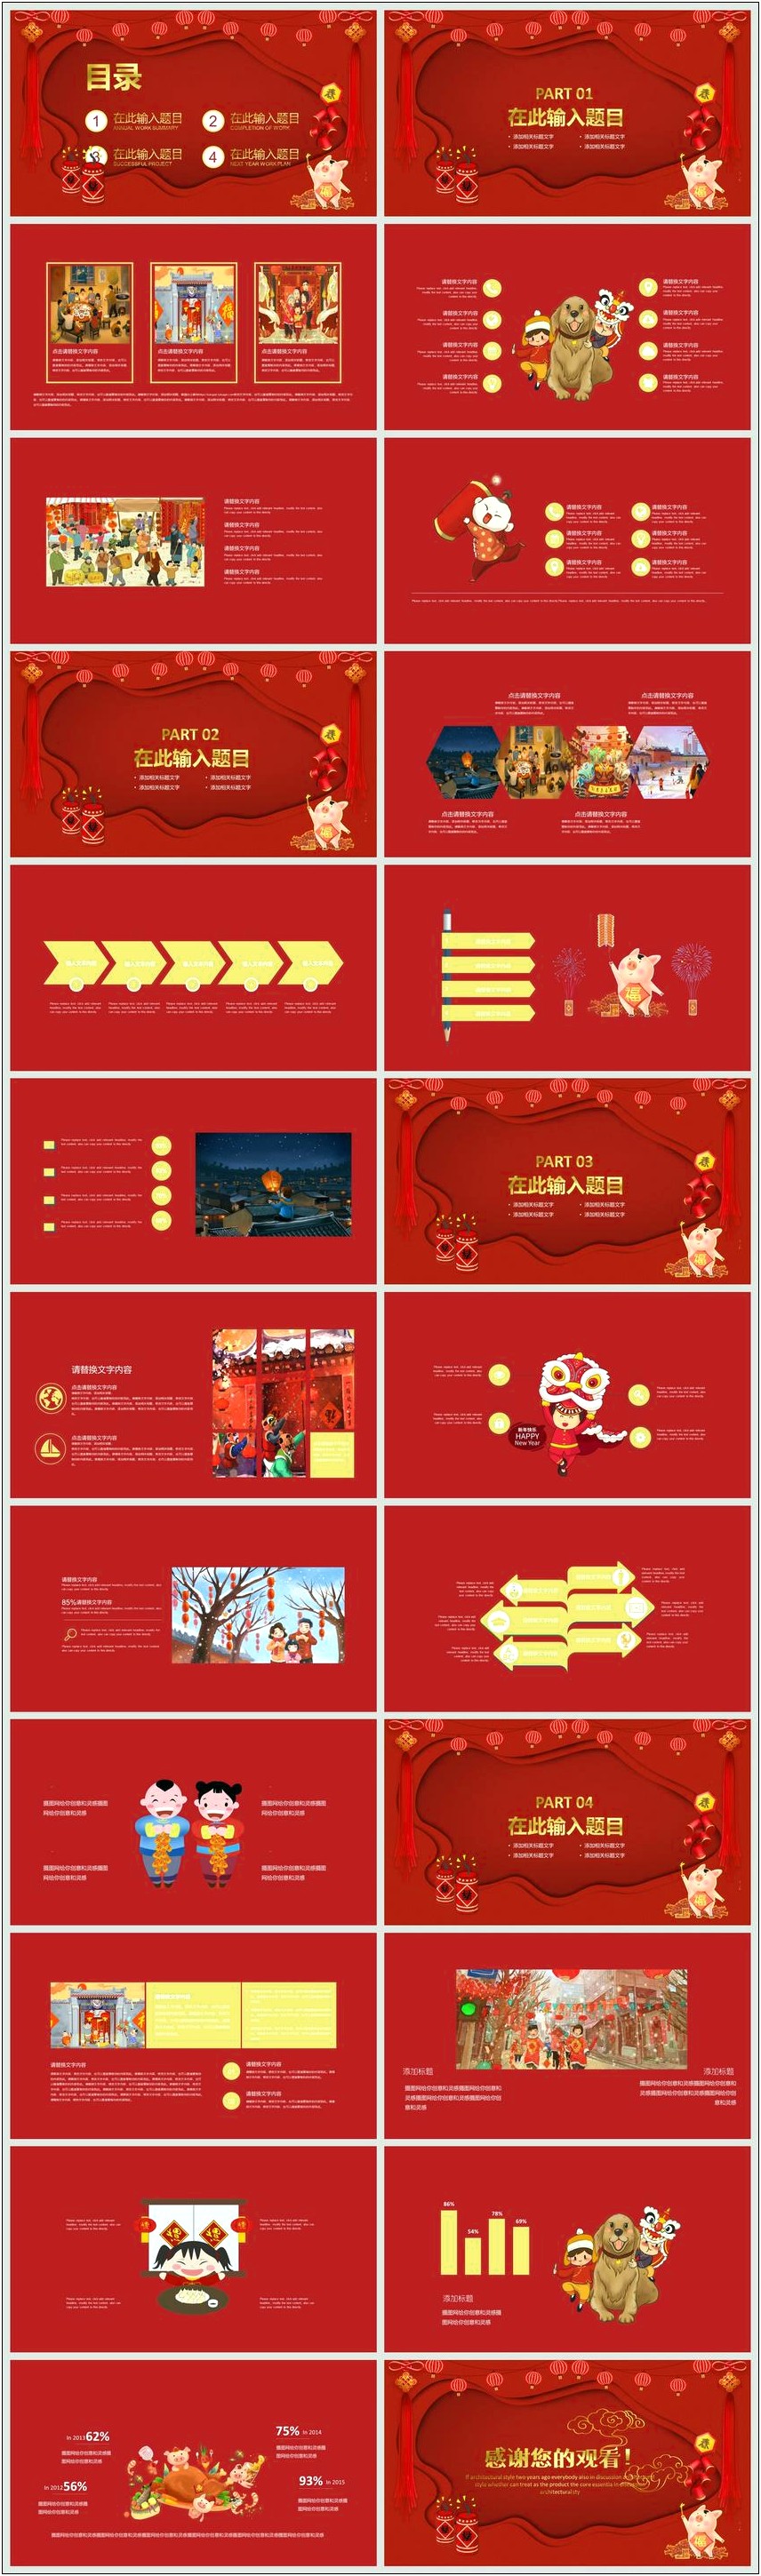 Free New Years Eve Powerpoint Template